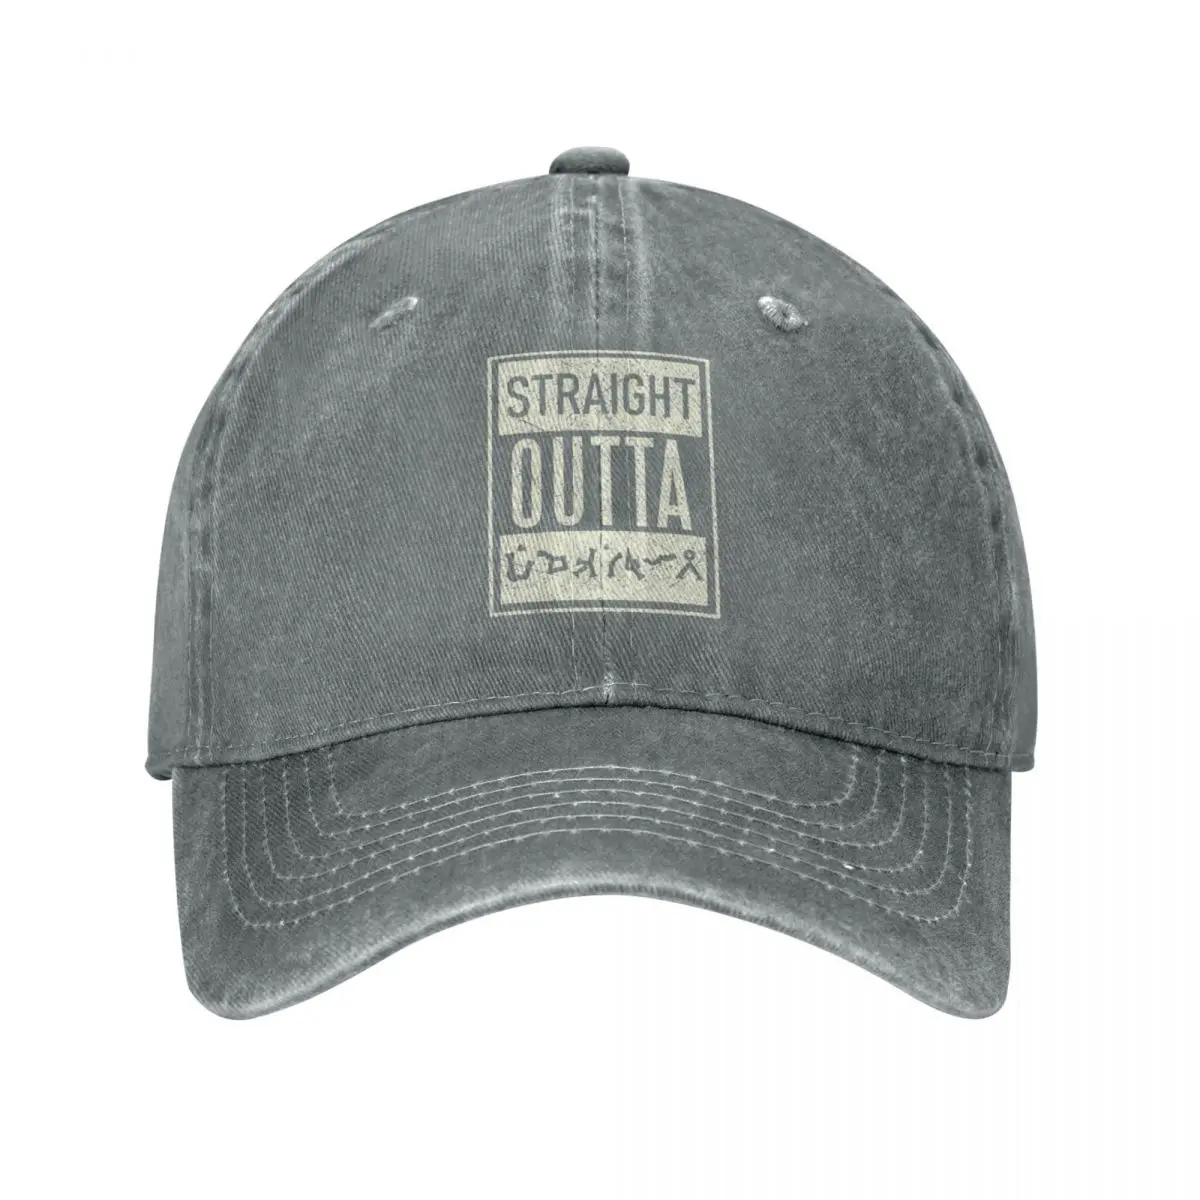 

Straight Outta Earth Dialing Code Stargate Cowboy Hat Horse Hat Cap For Women Men'S